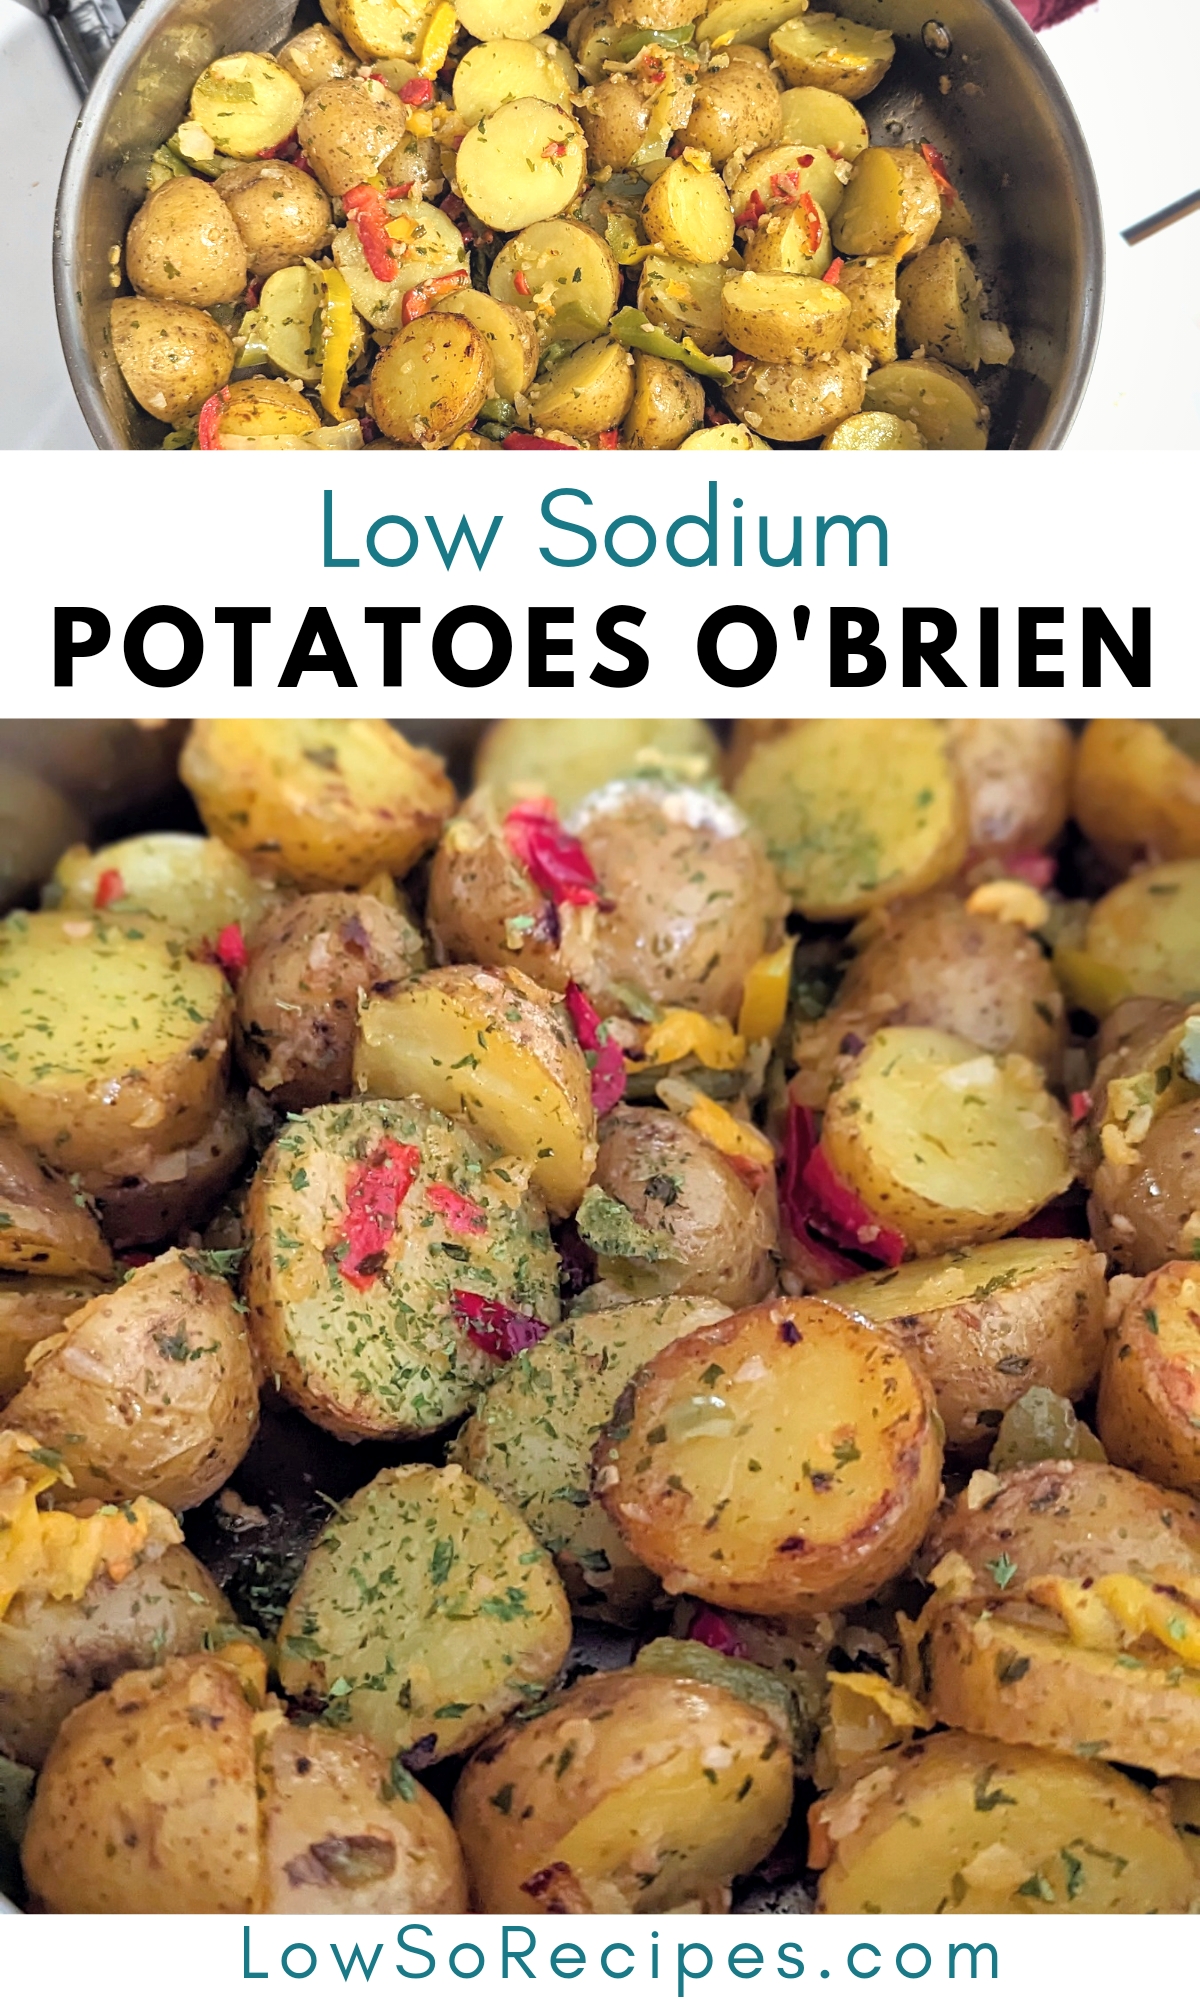 low sodium potatoes o'brien recipe with garlic unsatled butter onions and bell peppers